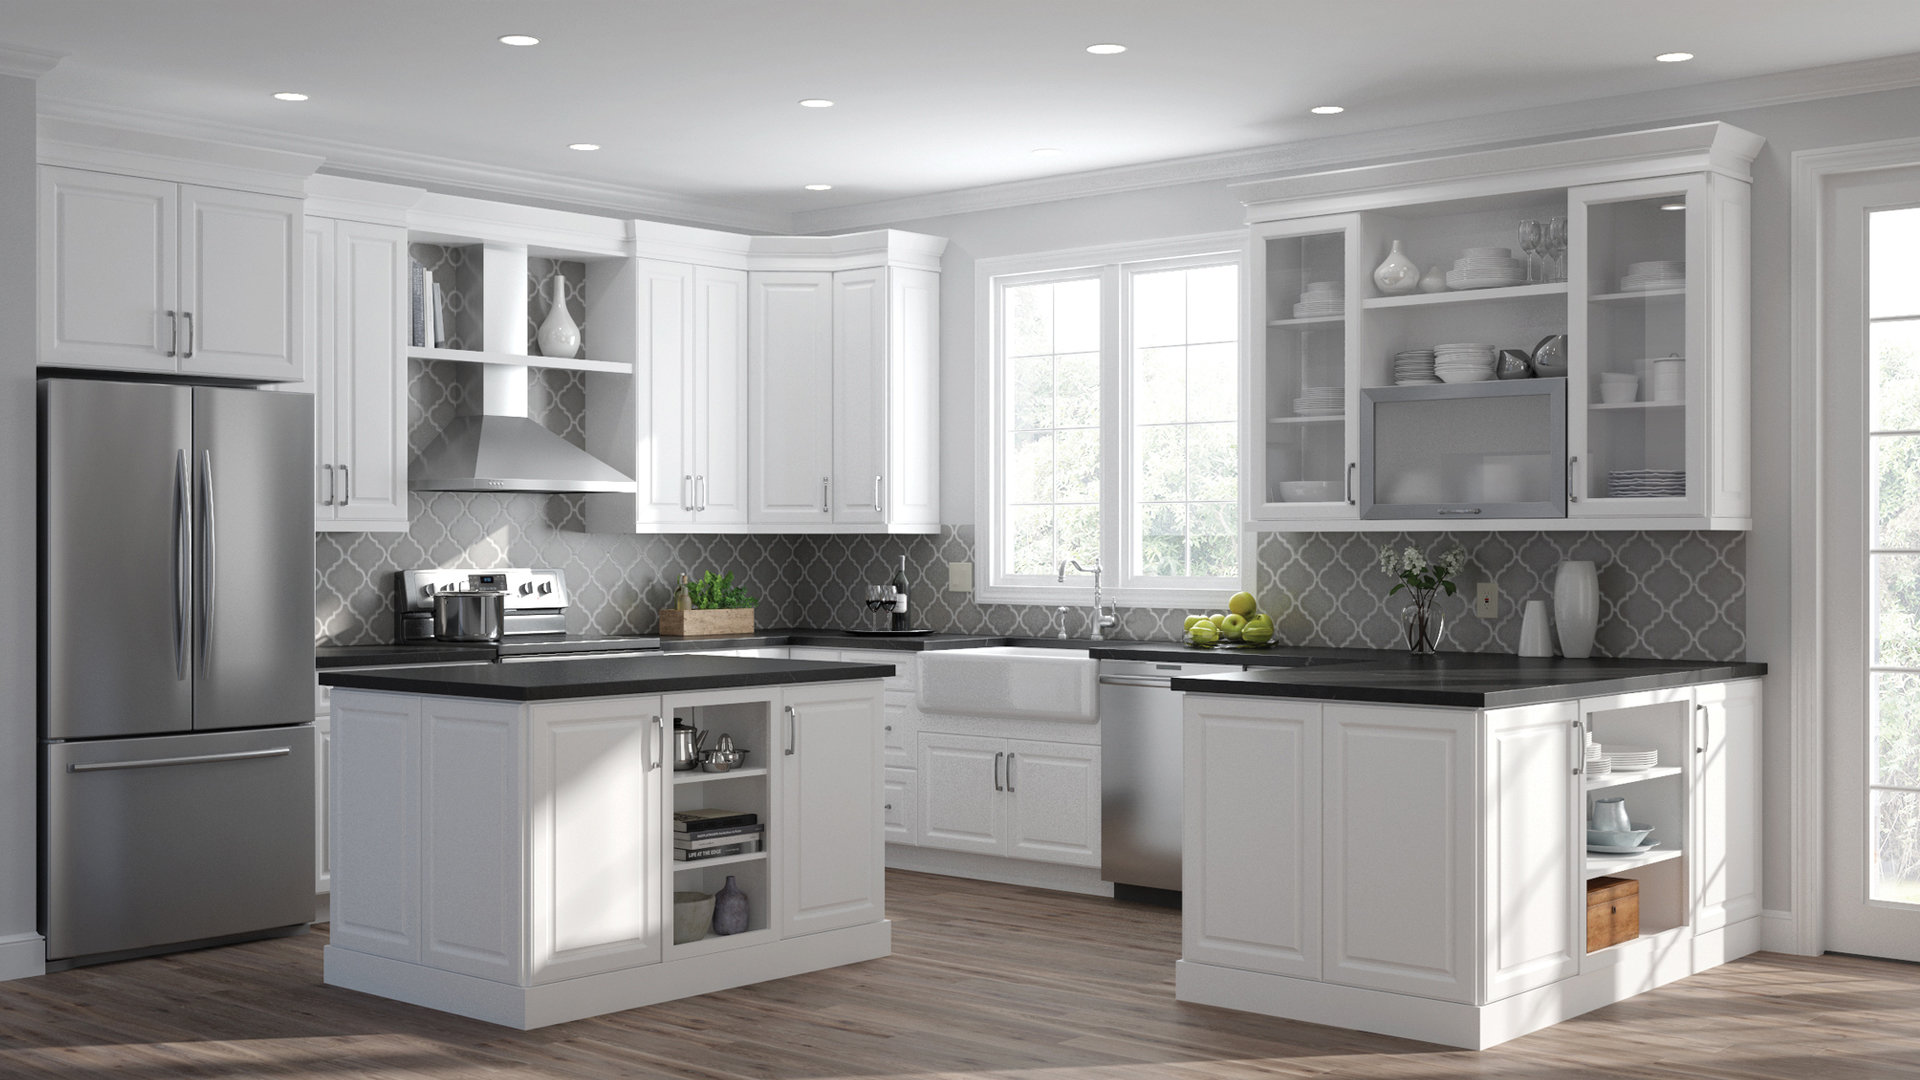 Elgin Wall Cabinets In White Kitchen, Home Depot White Kitchen Cabinets With Glass Doors